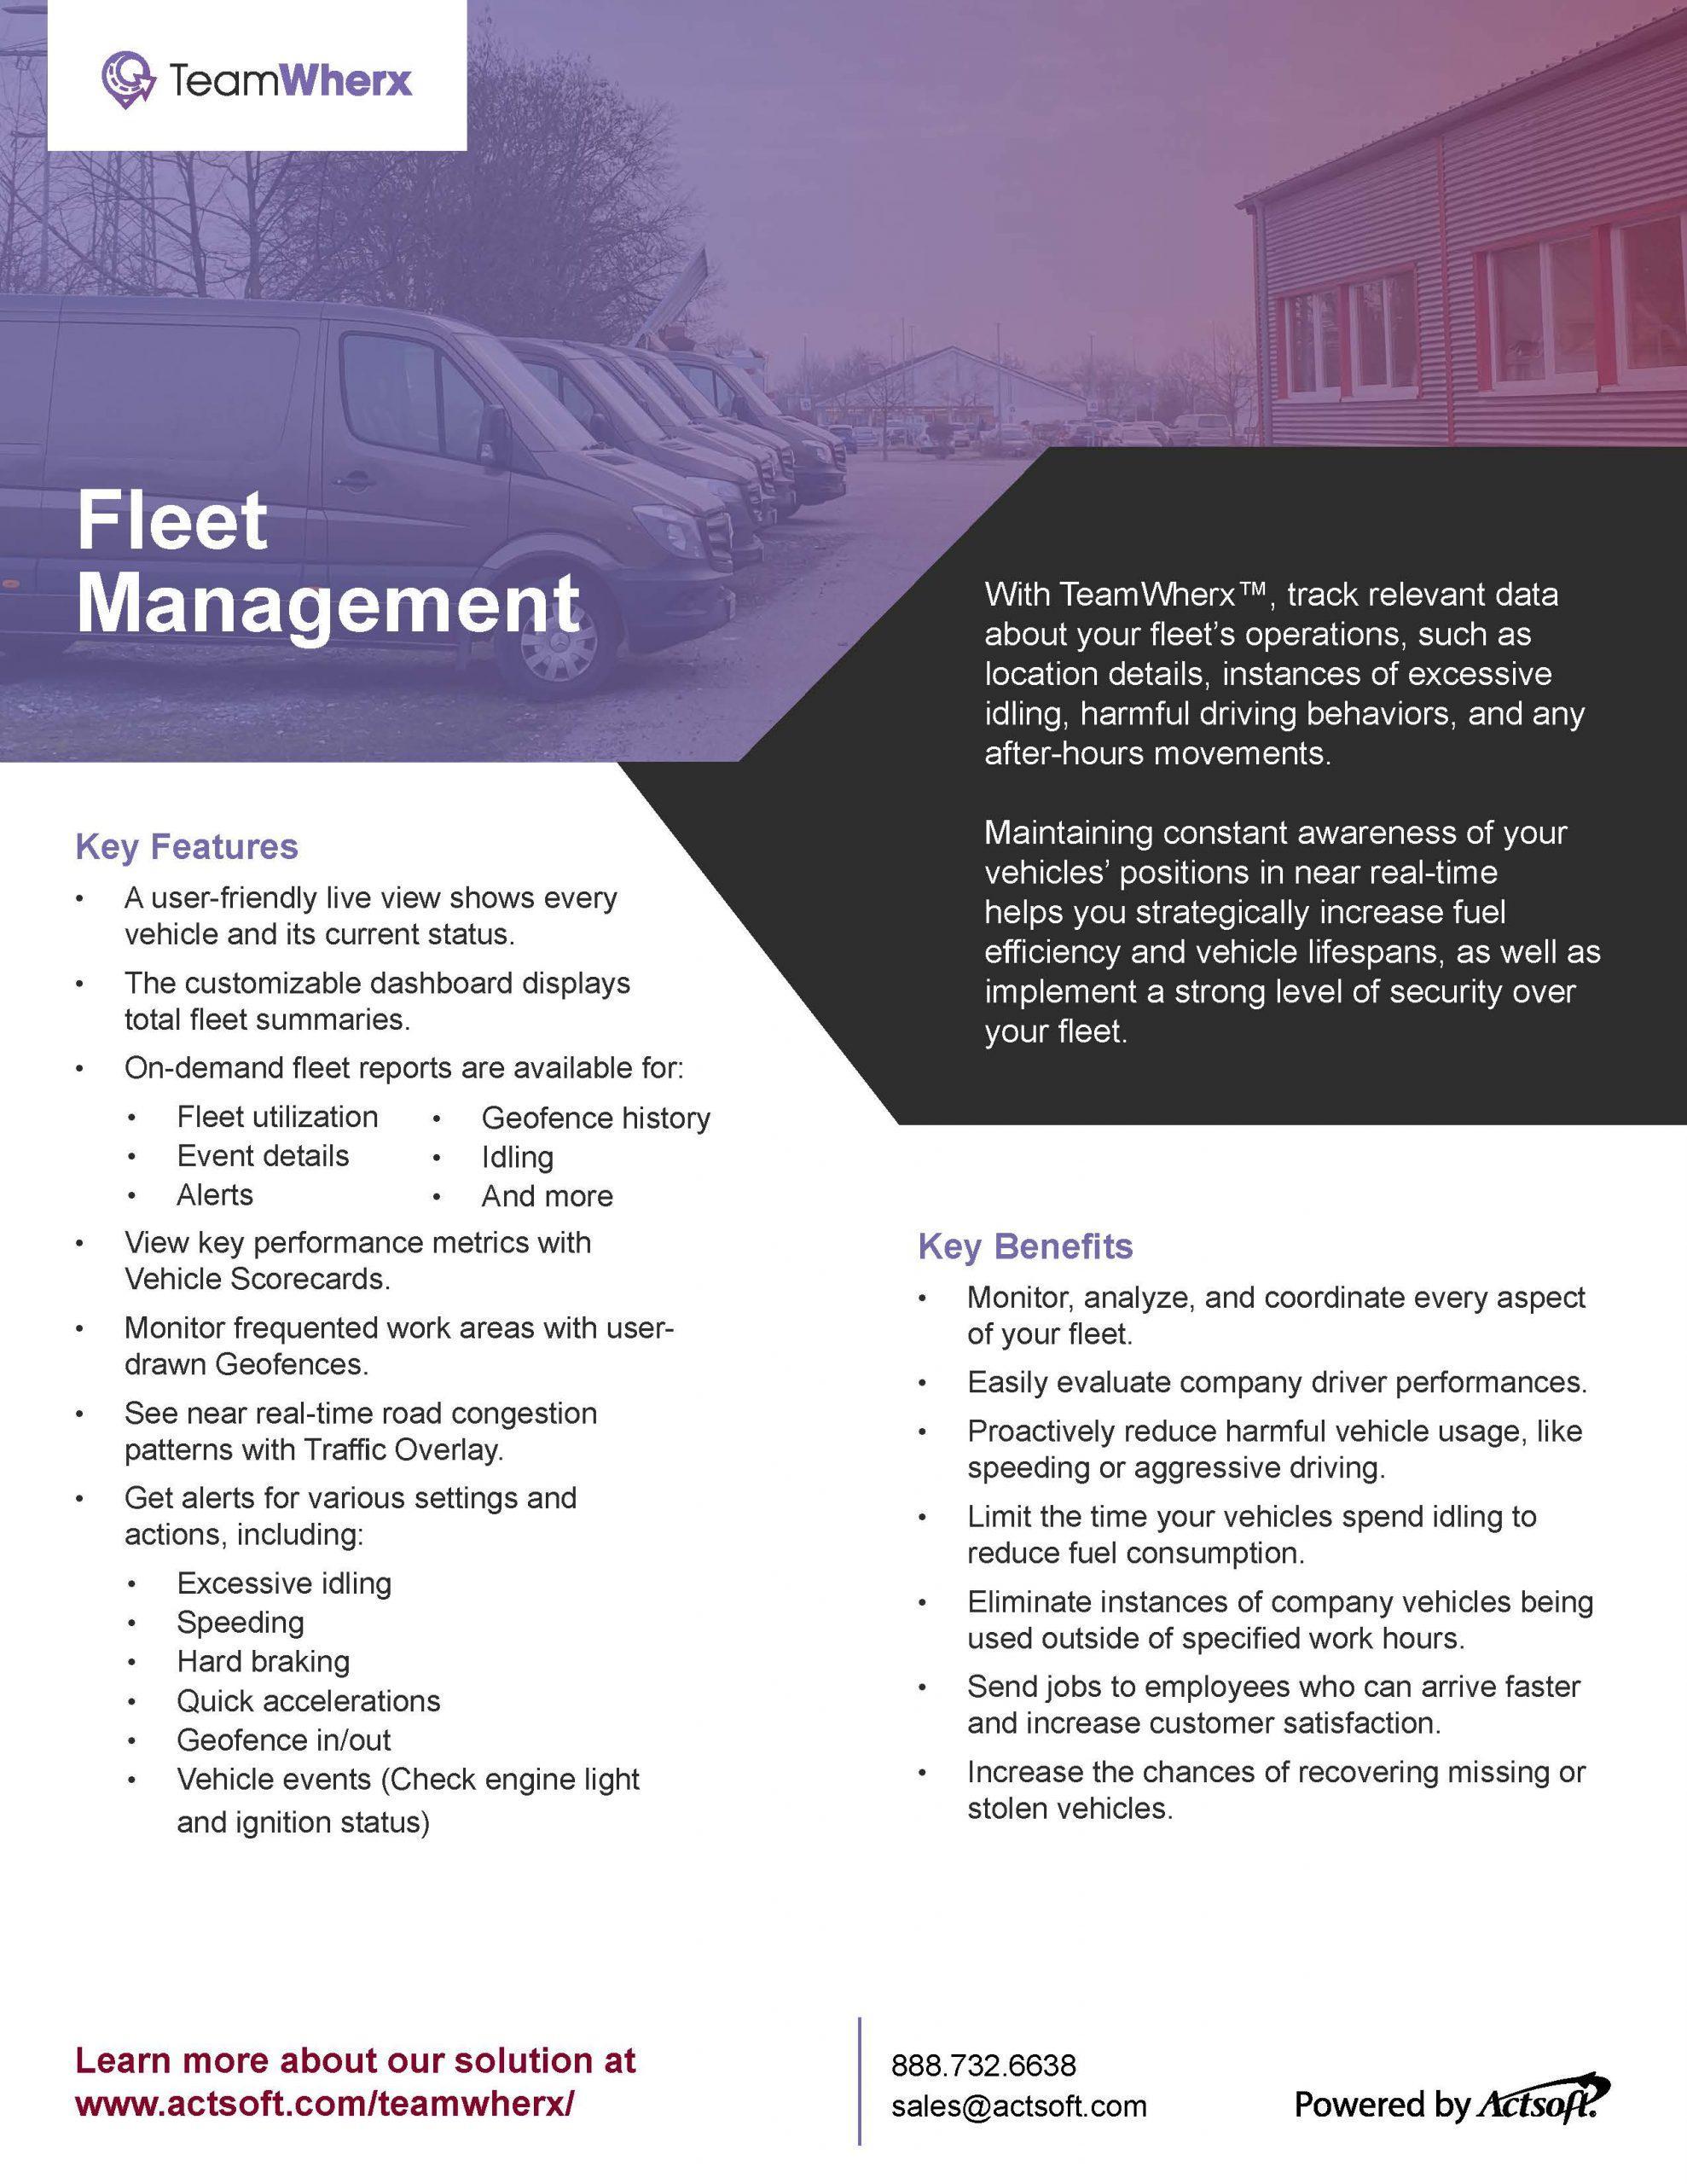 Fleet Management One-Pager